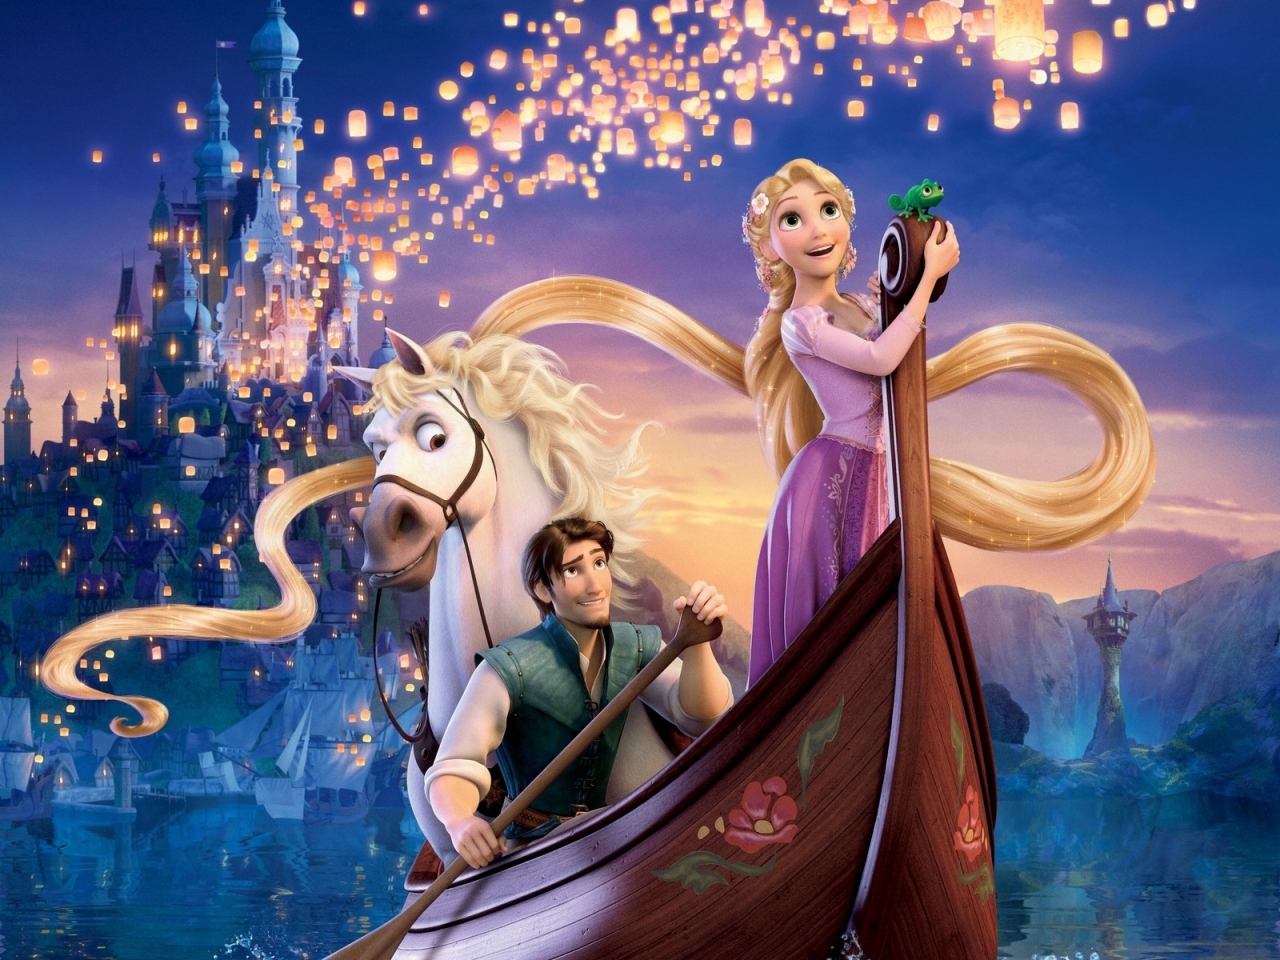 Tangled Musical Film for 1280 x 960 resolution